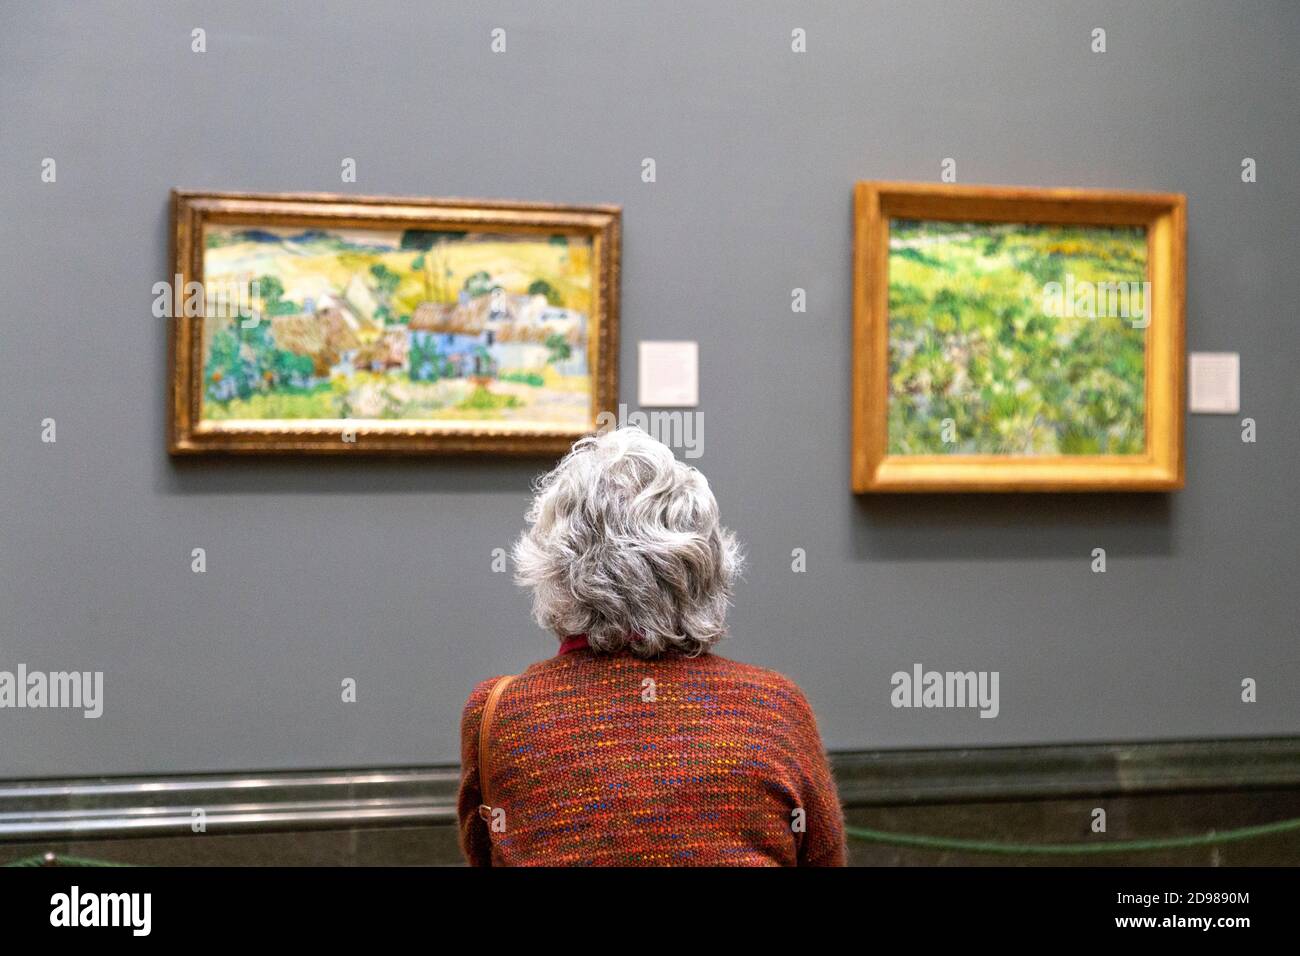 Elderly woman with grey hair looking at Vincent van Gogh paintings at the National Gallery, London, UK Stock Photo